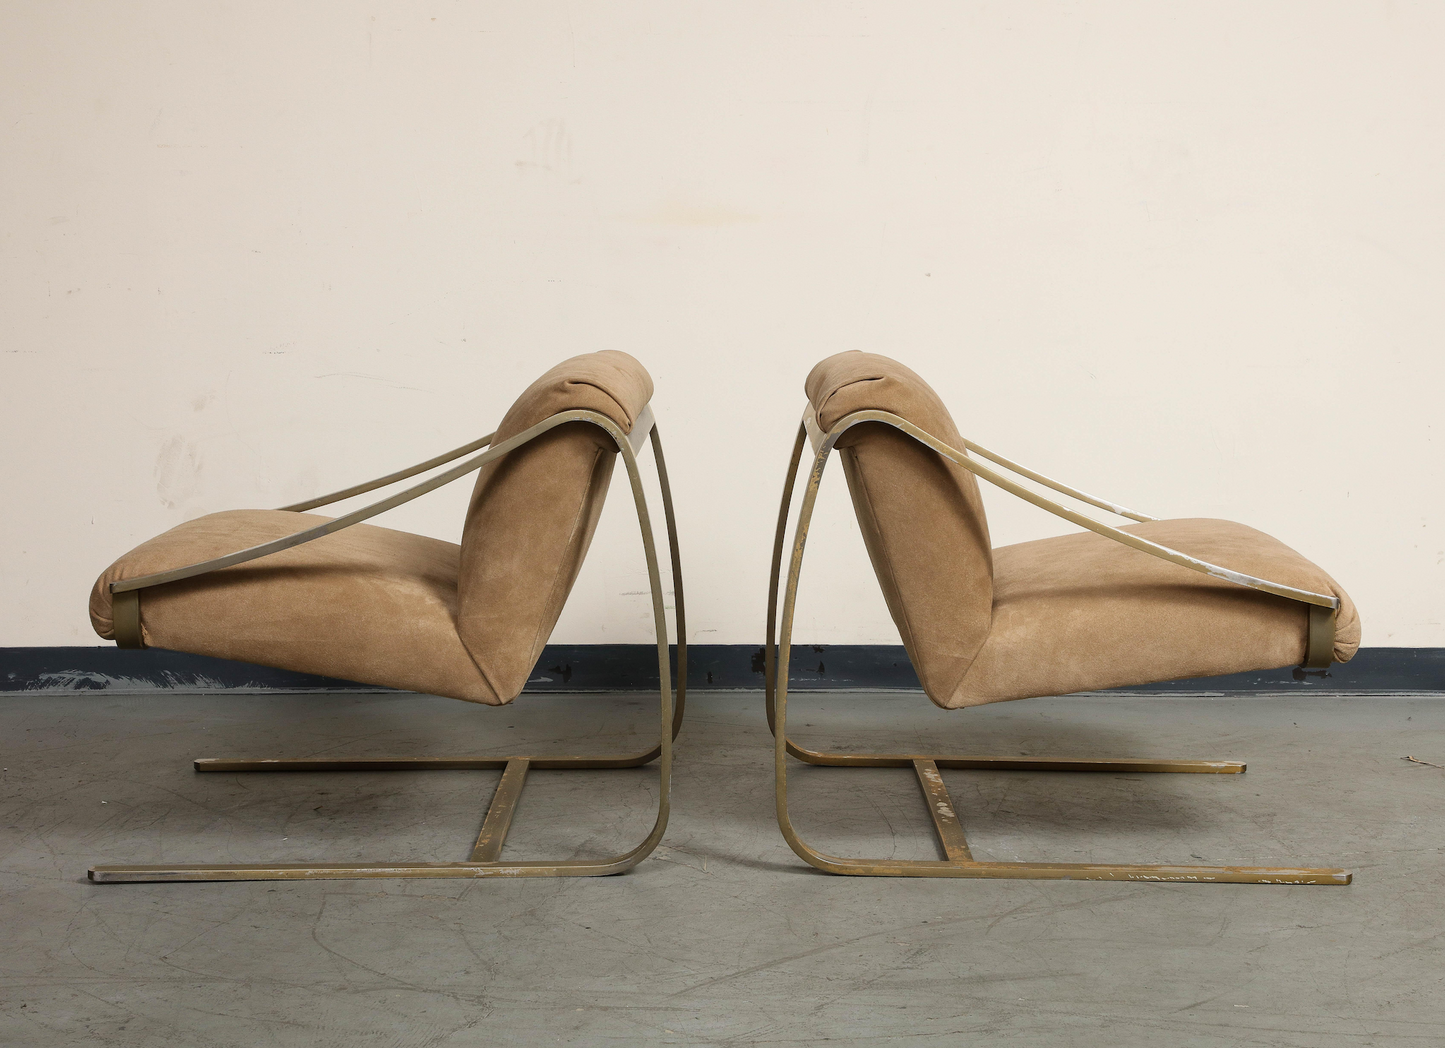 Pair of Bronze and Suede Modernist Lounge Chairs, circa 1965